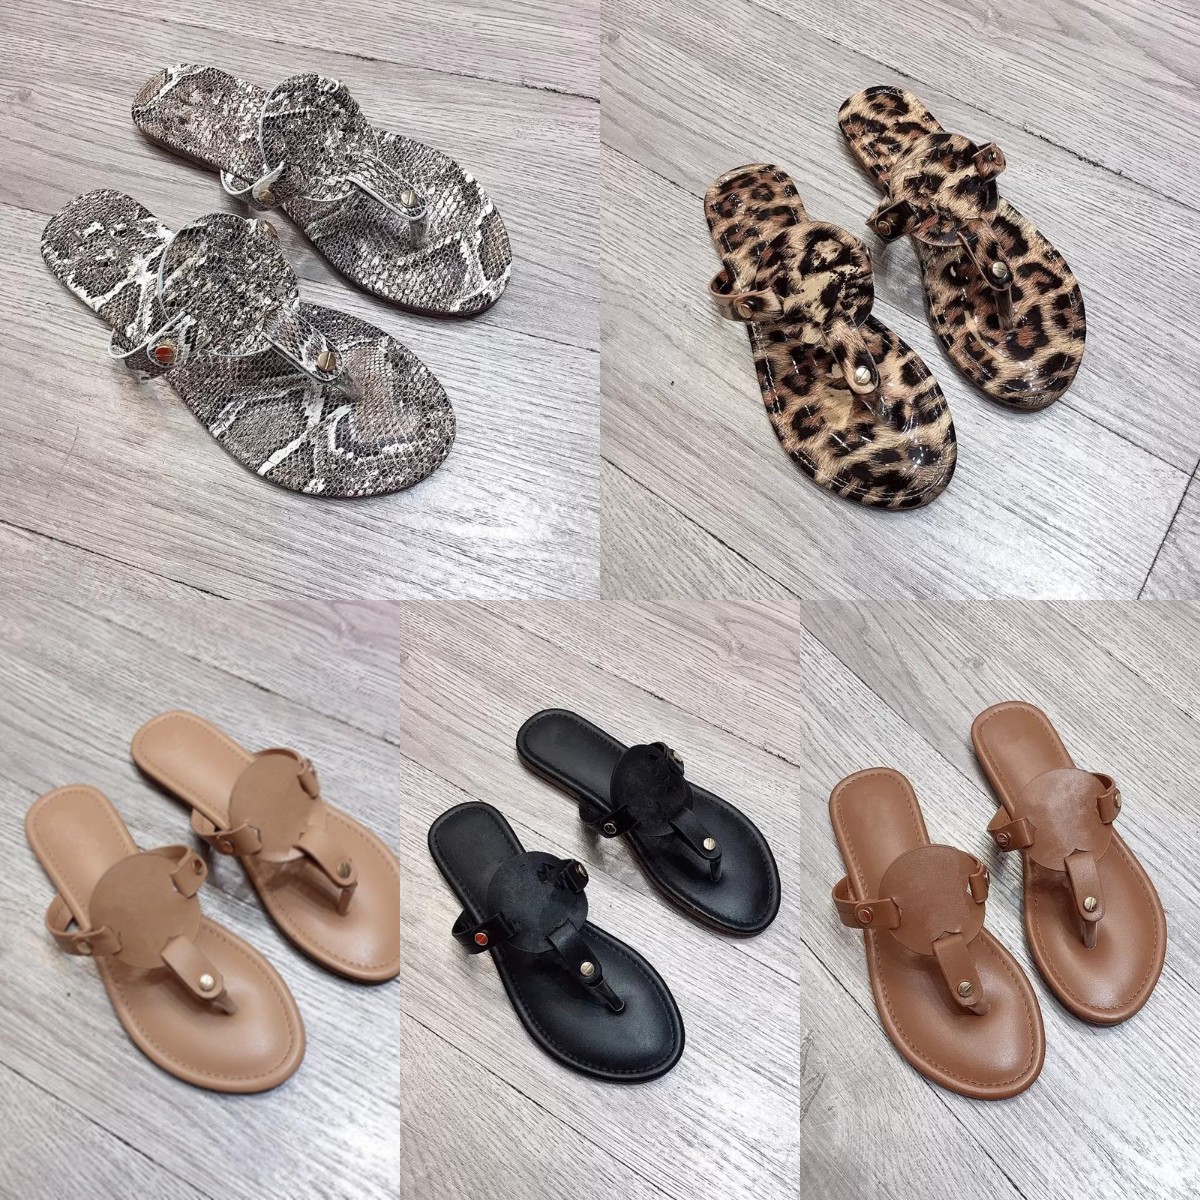 

2022 Tories Buckle Slides Leopard Python Snakeskin Slippers Women Low Heels Flat Sandals Hollow out Summer Beach Shoes Leather thong Flip Flops Party Slider Loafers, Fill postage